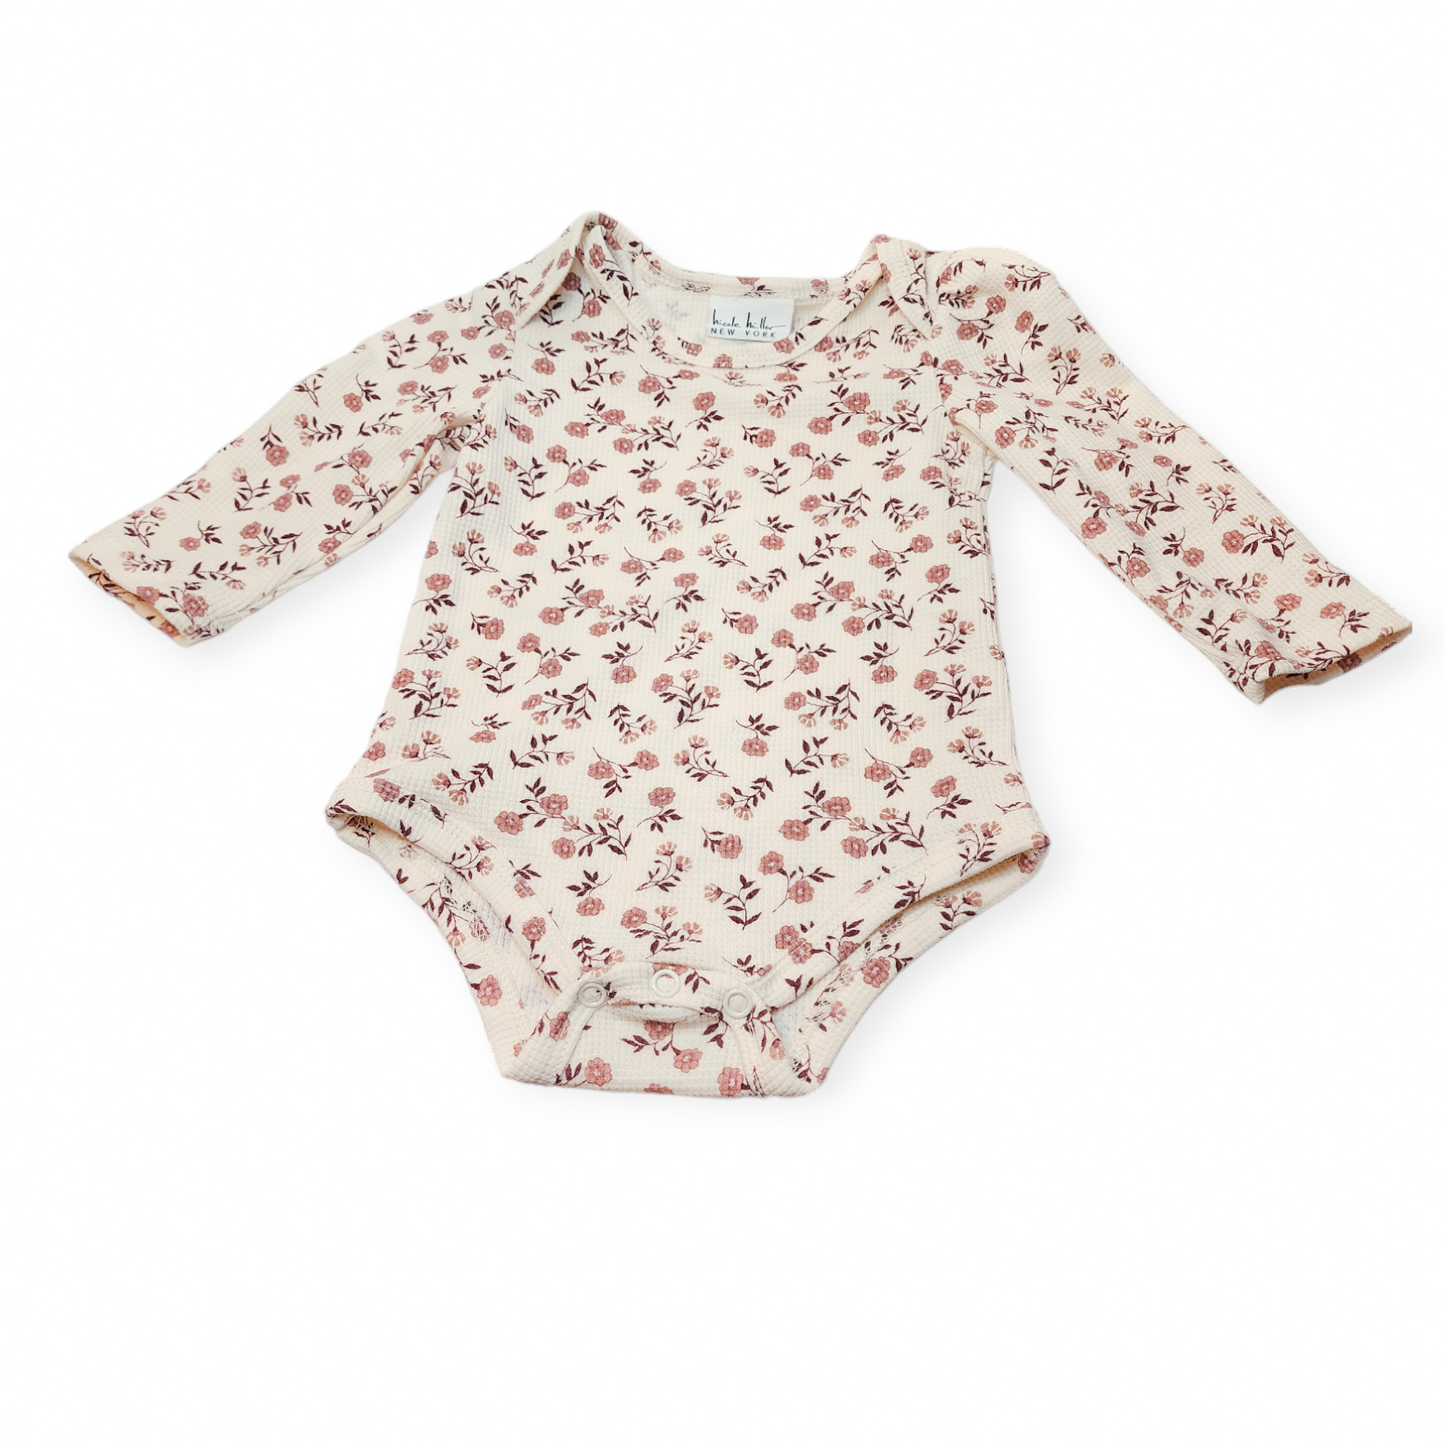 3pcs Baby Girl Sweet Floral Long Sleeve Skirt Set,by Nicole Miller .Size 12m Color: Mauve